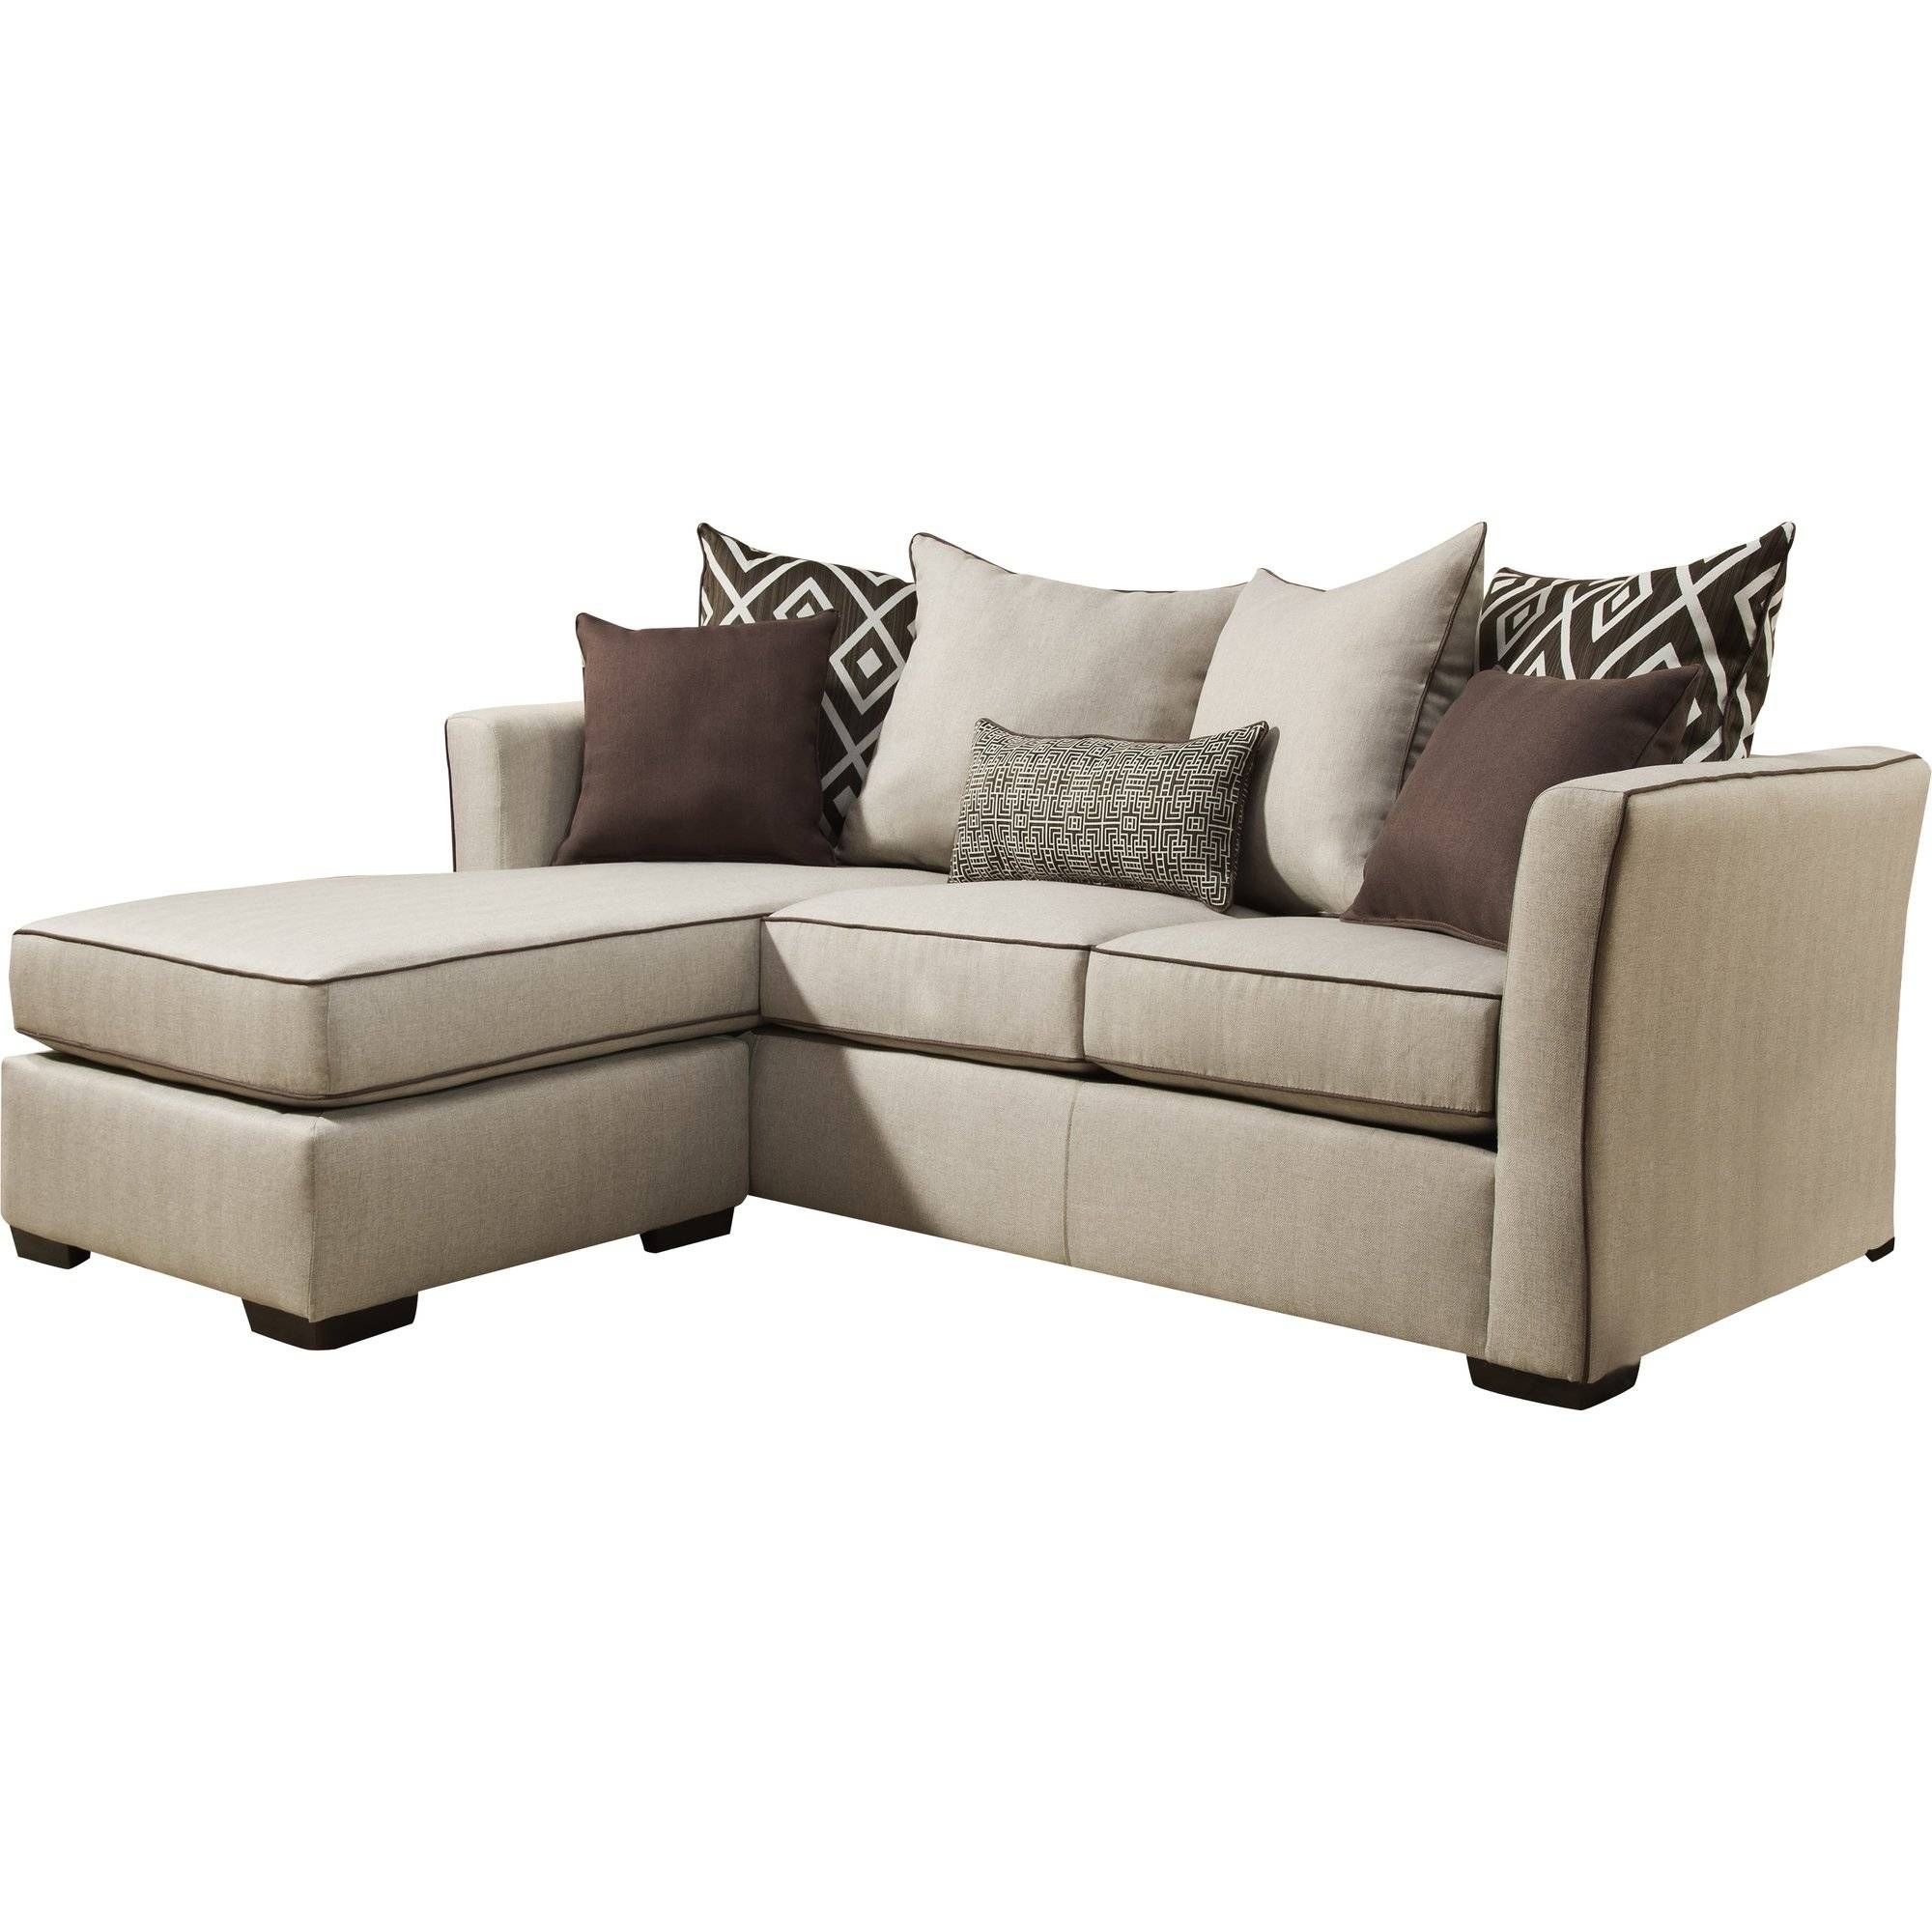 Simmons Chaise Sofa – Leather Sectional Sofa Pertaining To Simmons Chaise Sofa (View 3 of 25)